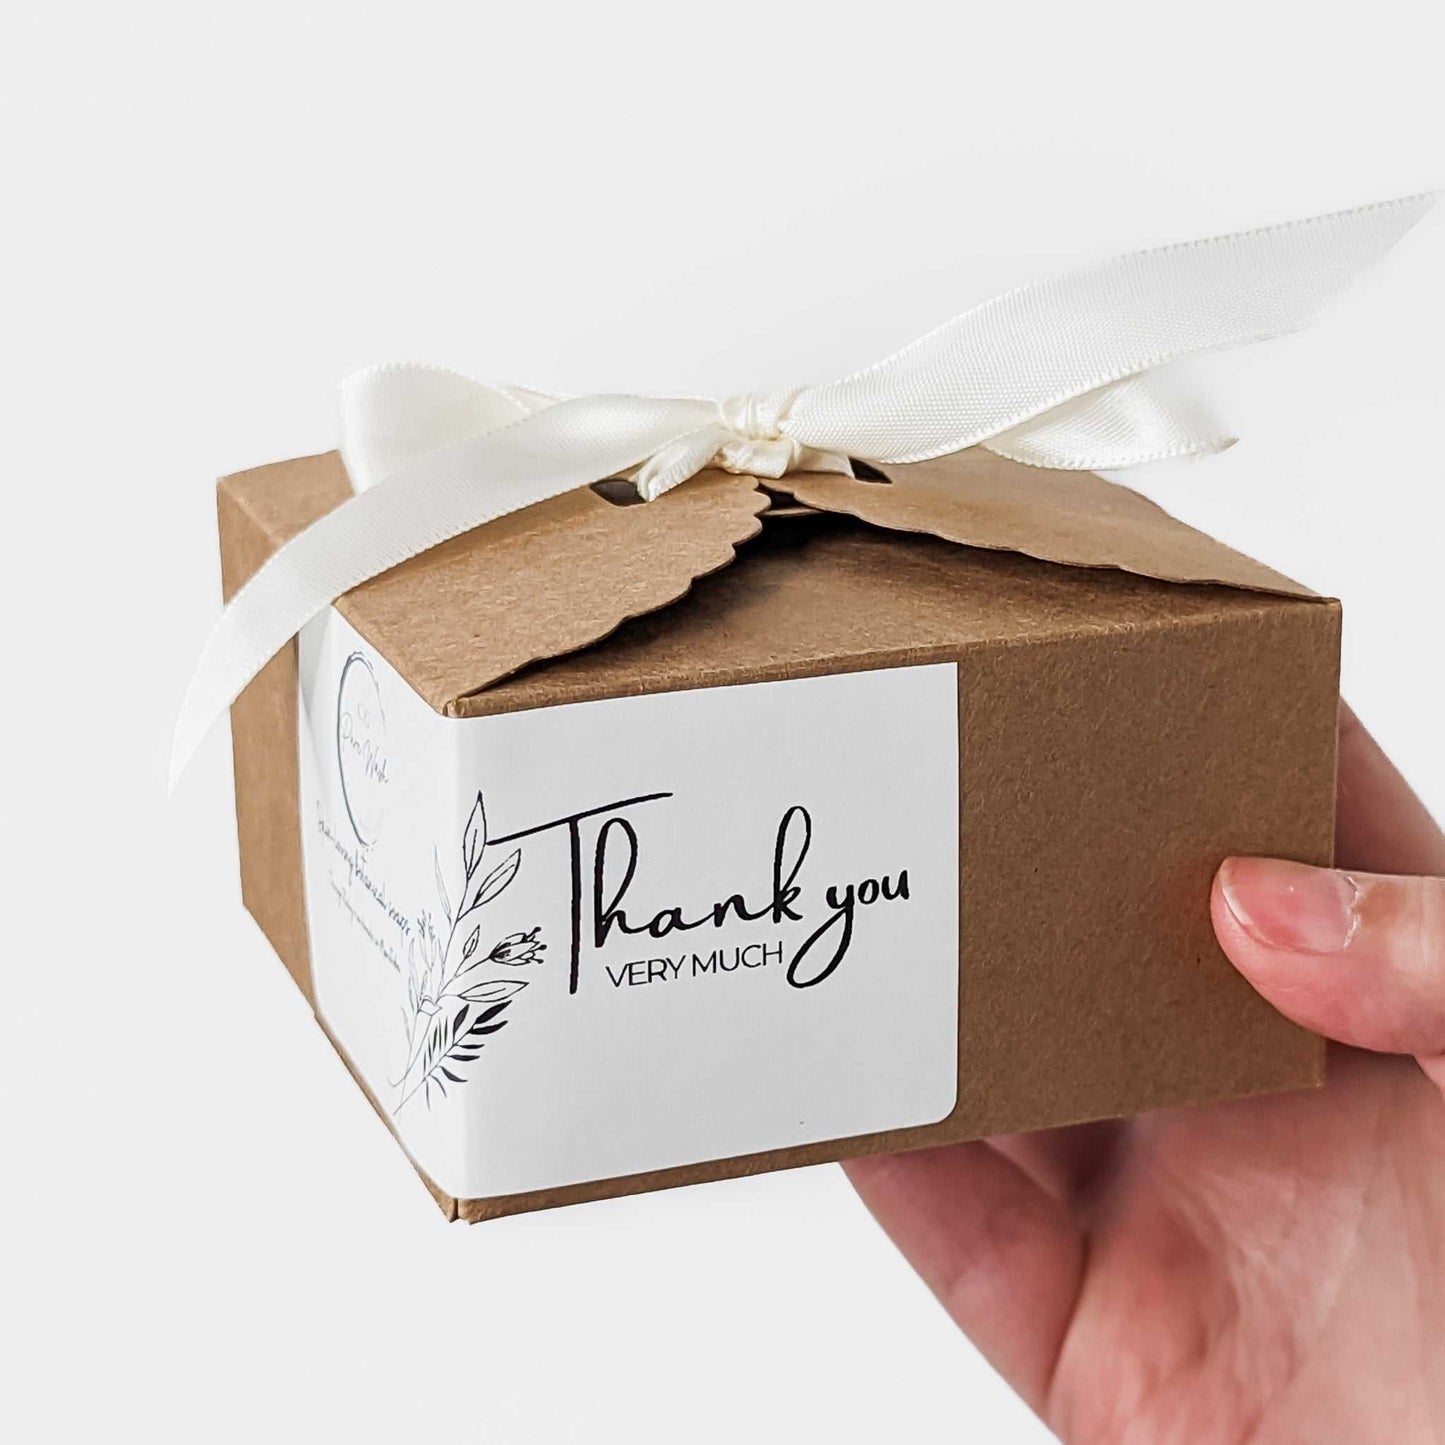 Natural, handmade soap bars from Winnipeg, Manitoba, nestled in a sustainable gift box with an elegant ribbon and appreciation note.